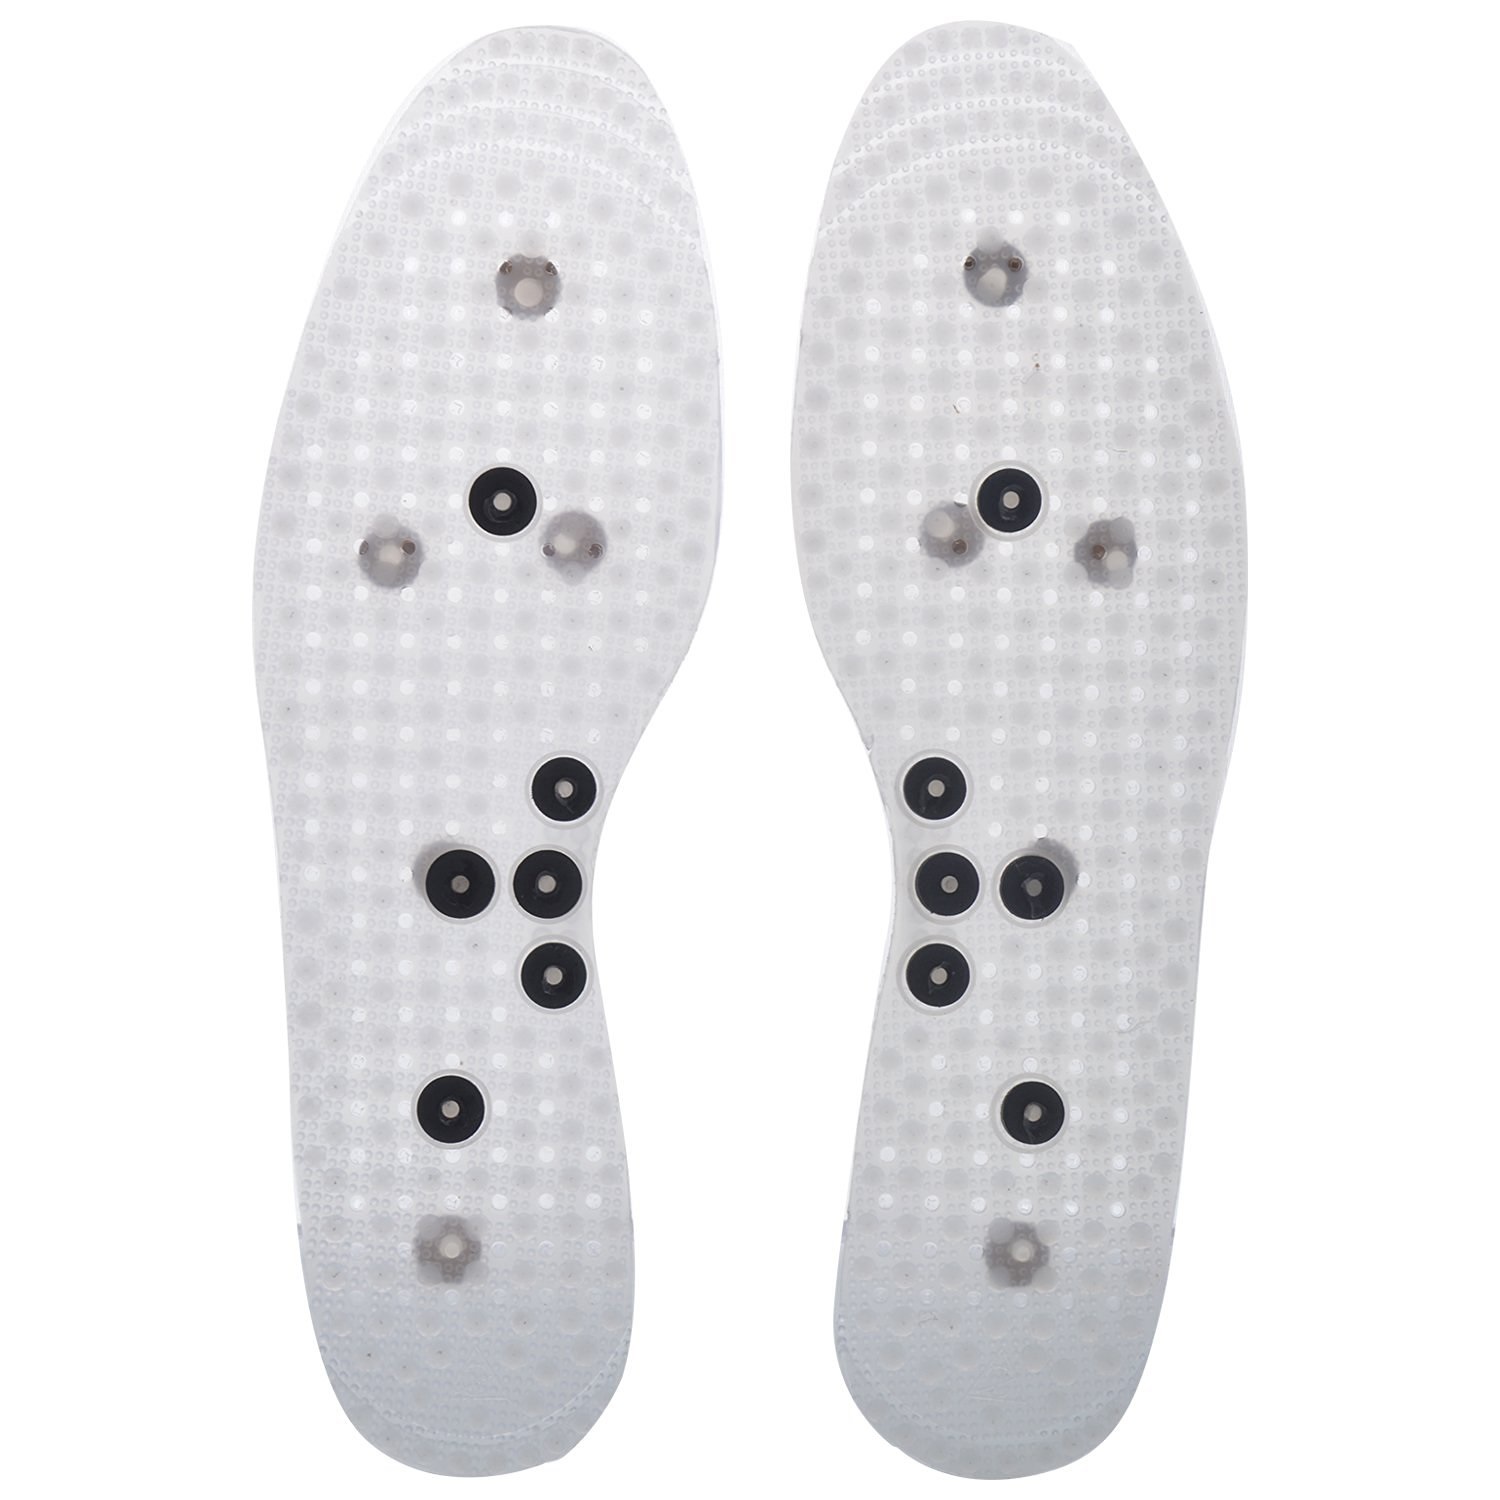 GHK H65 Acupressure Magnetic Shoe Insole for Blood Circulation & Foot Massage Free Size, 1 Pair